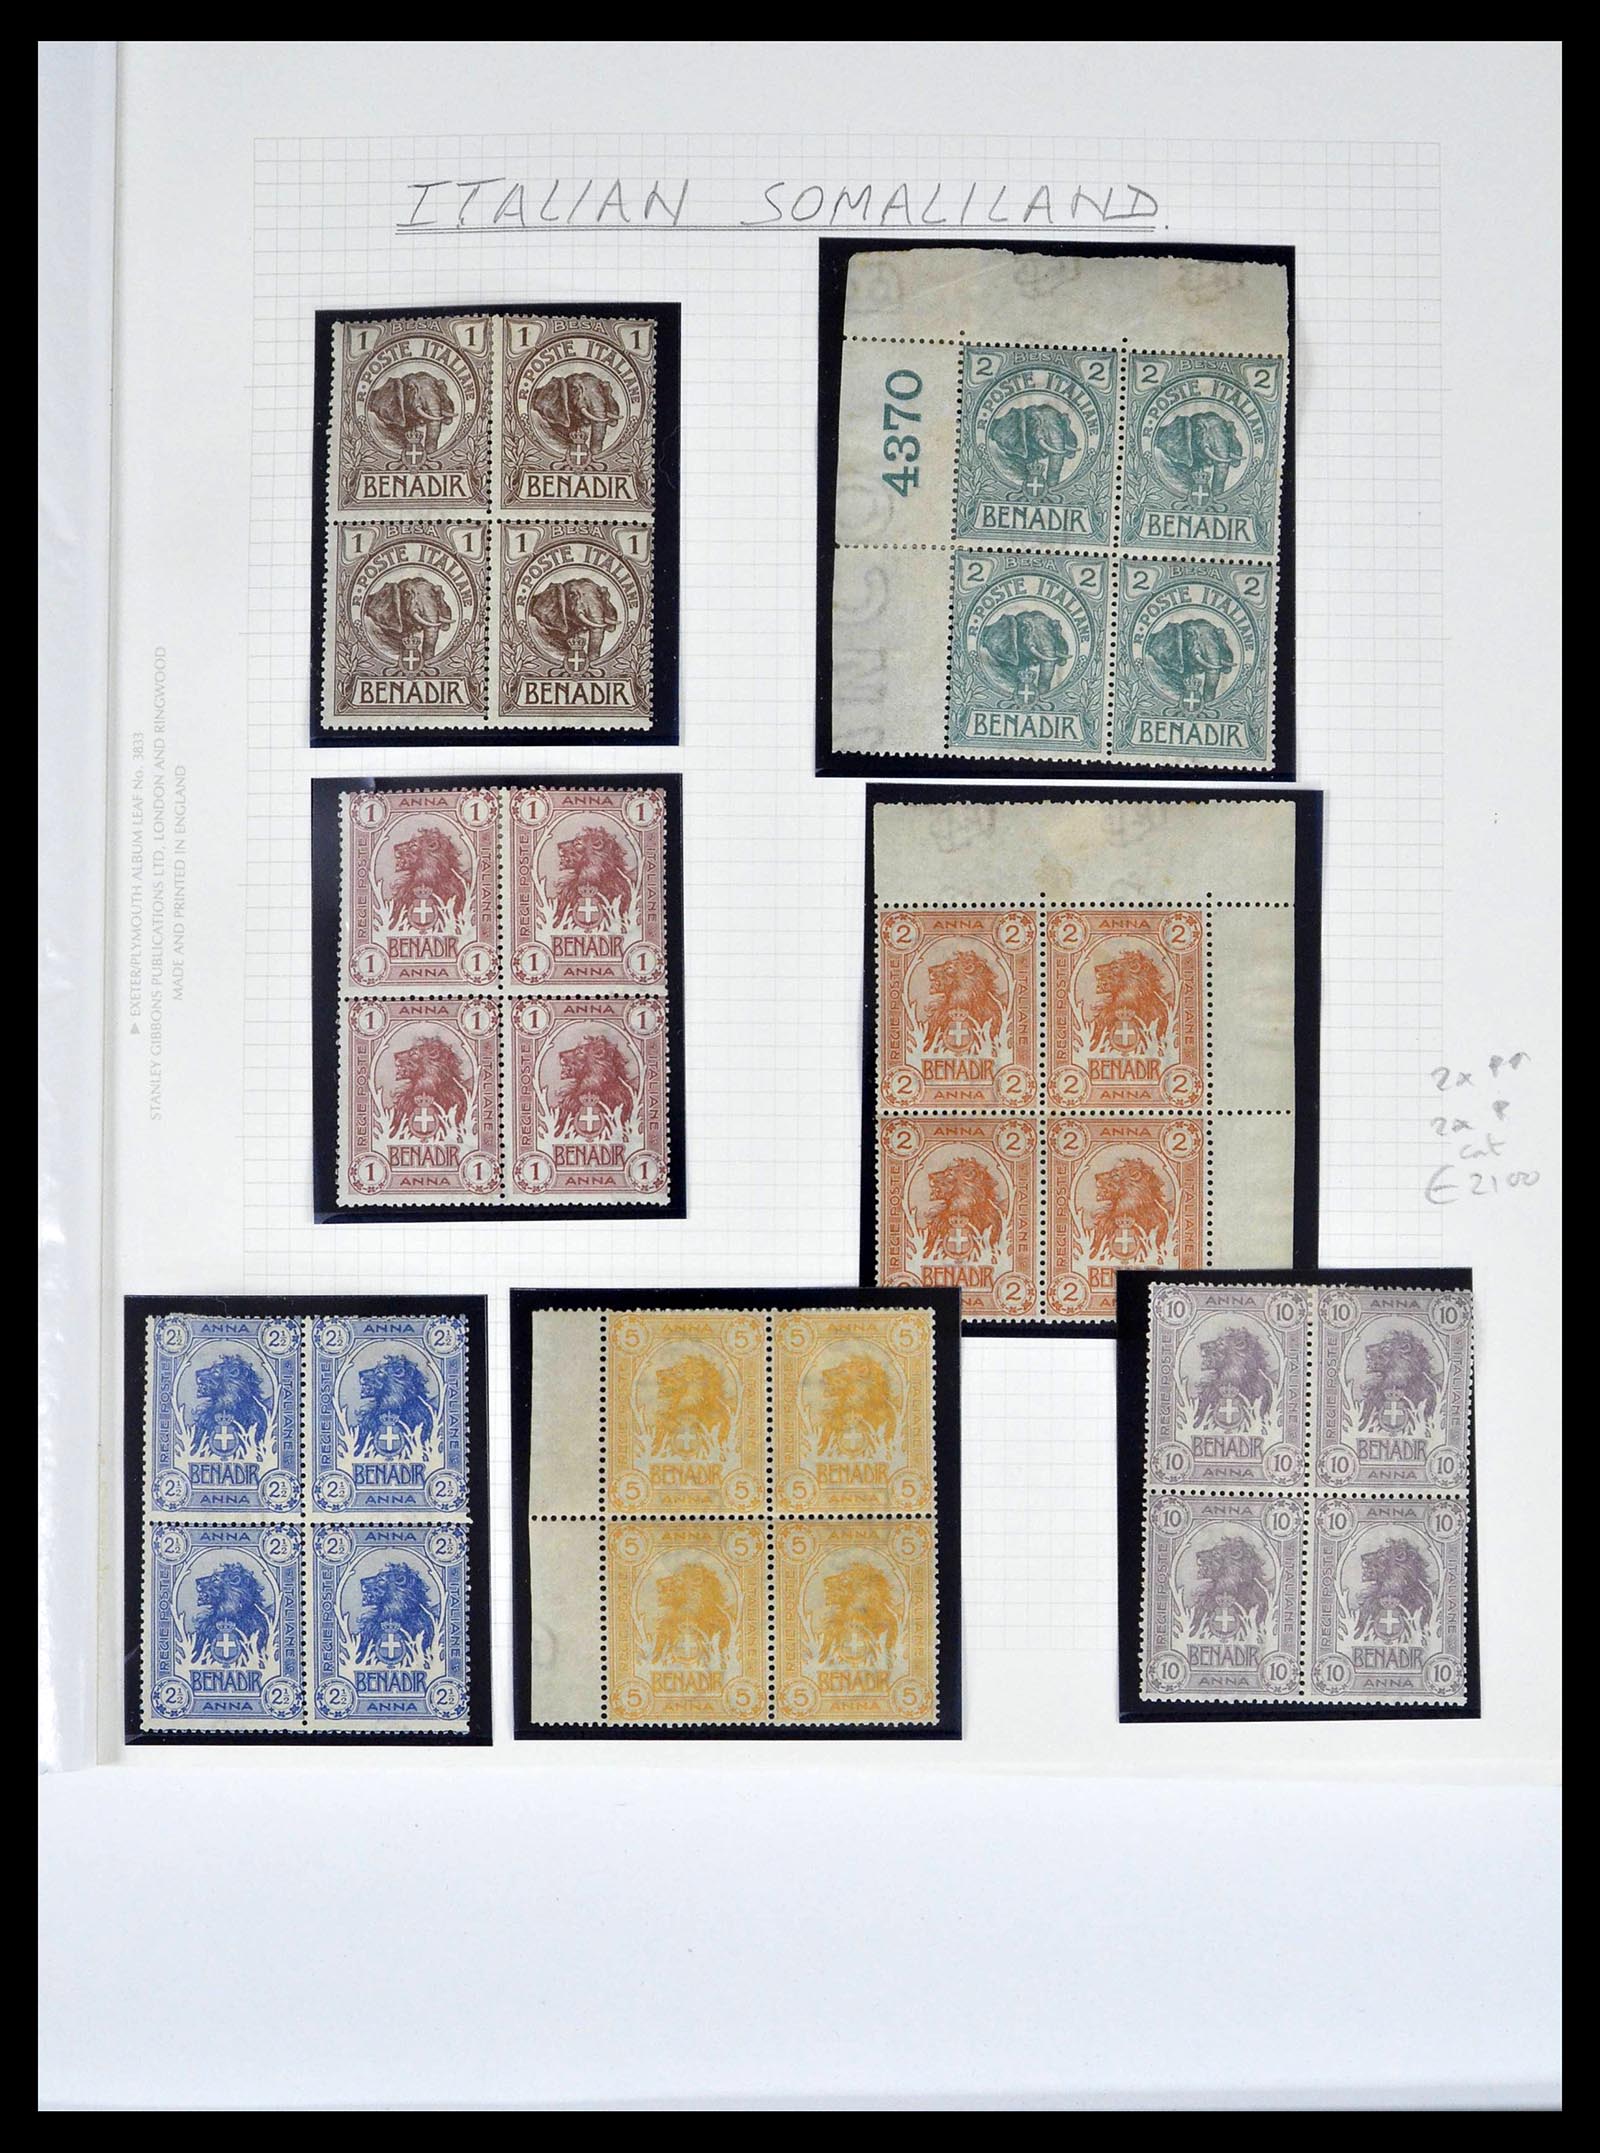 39058 0001 - Stamp collection 39058 Somalia complete 1903-1960.